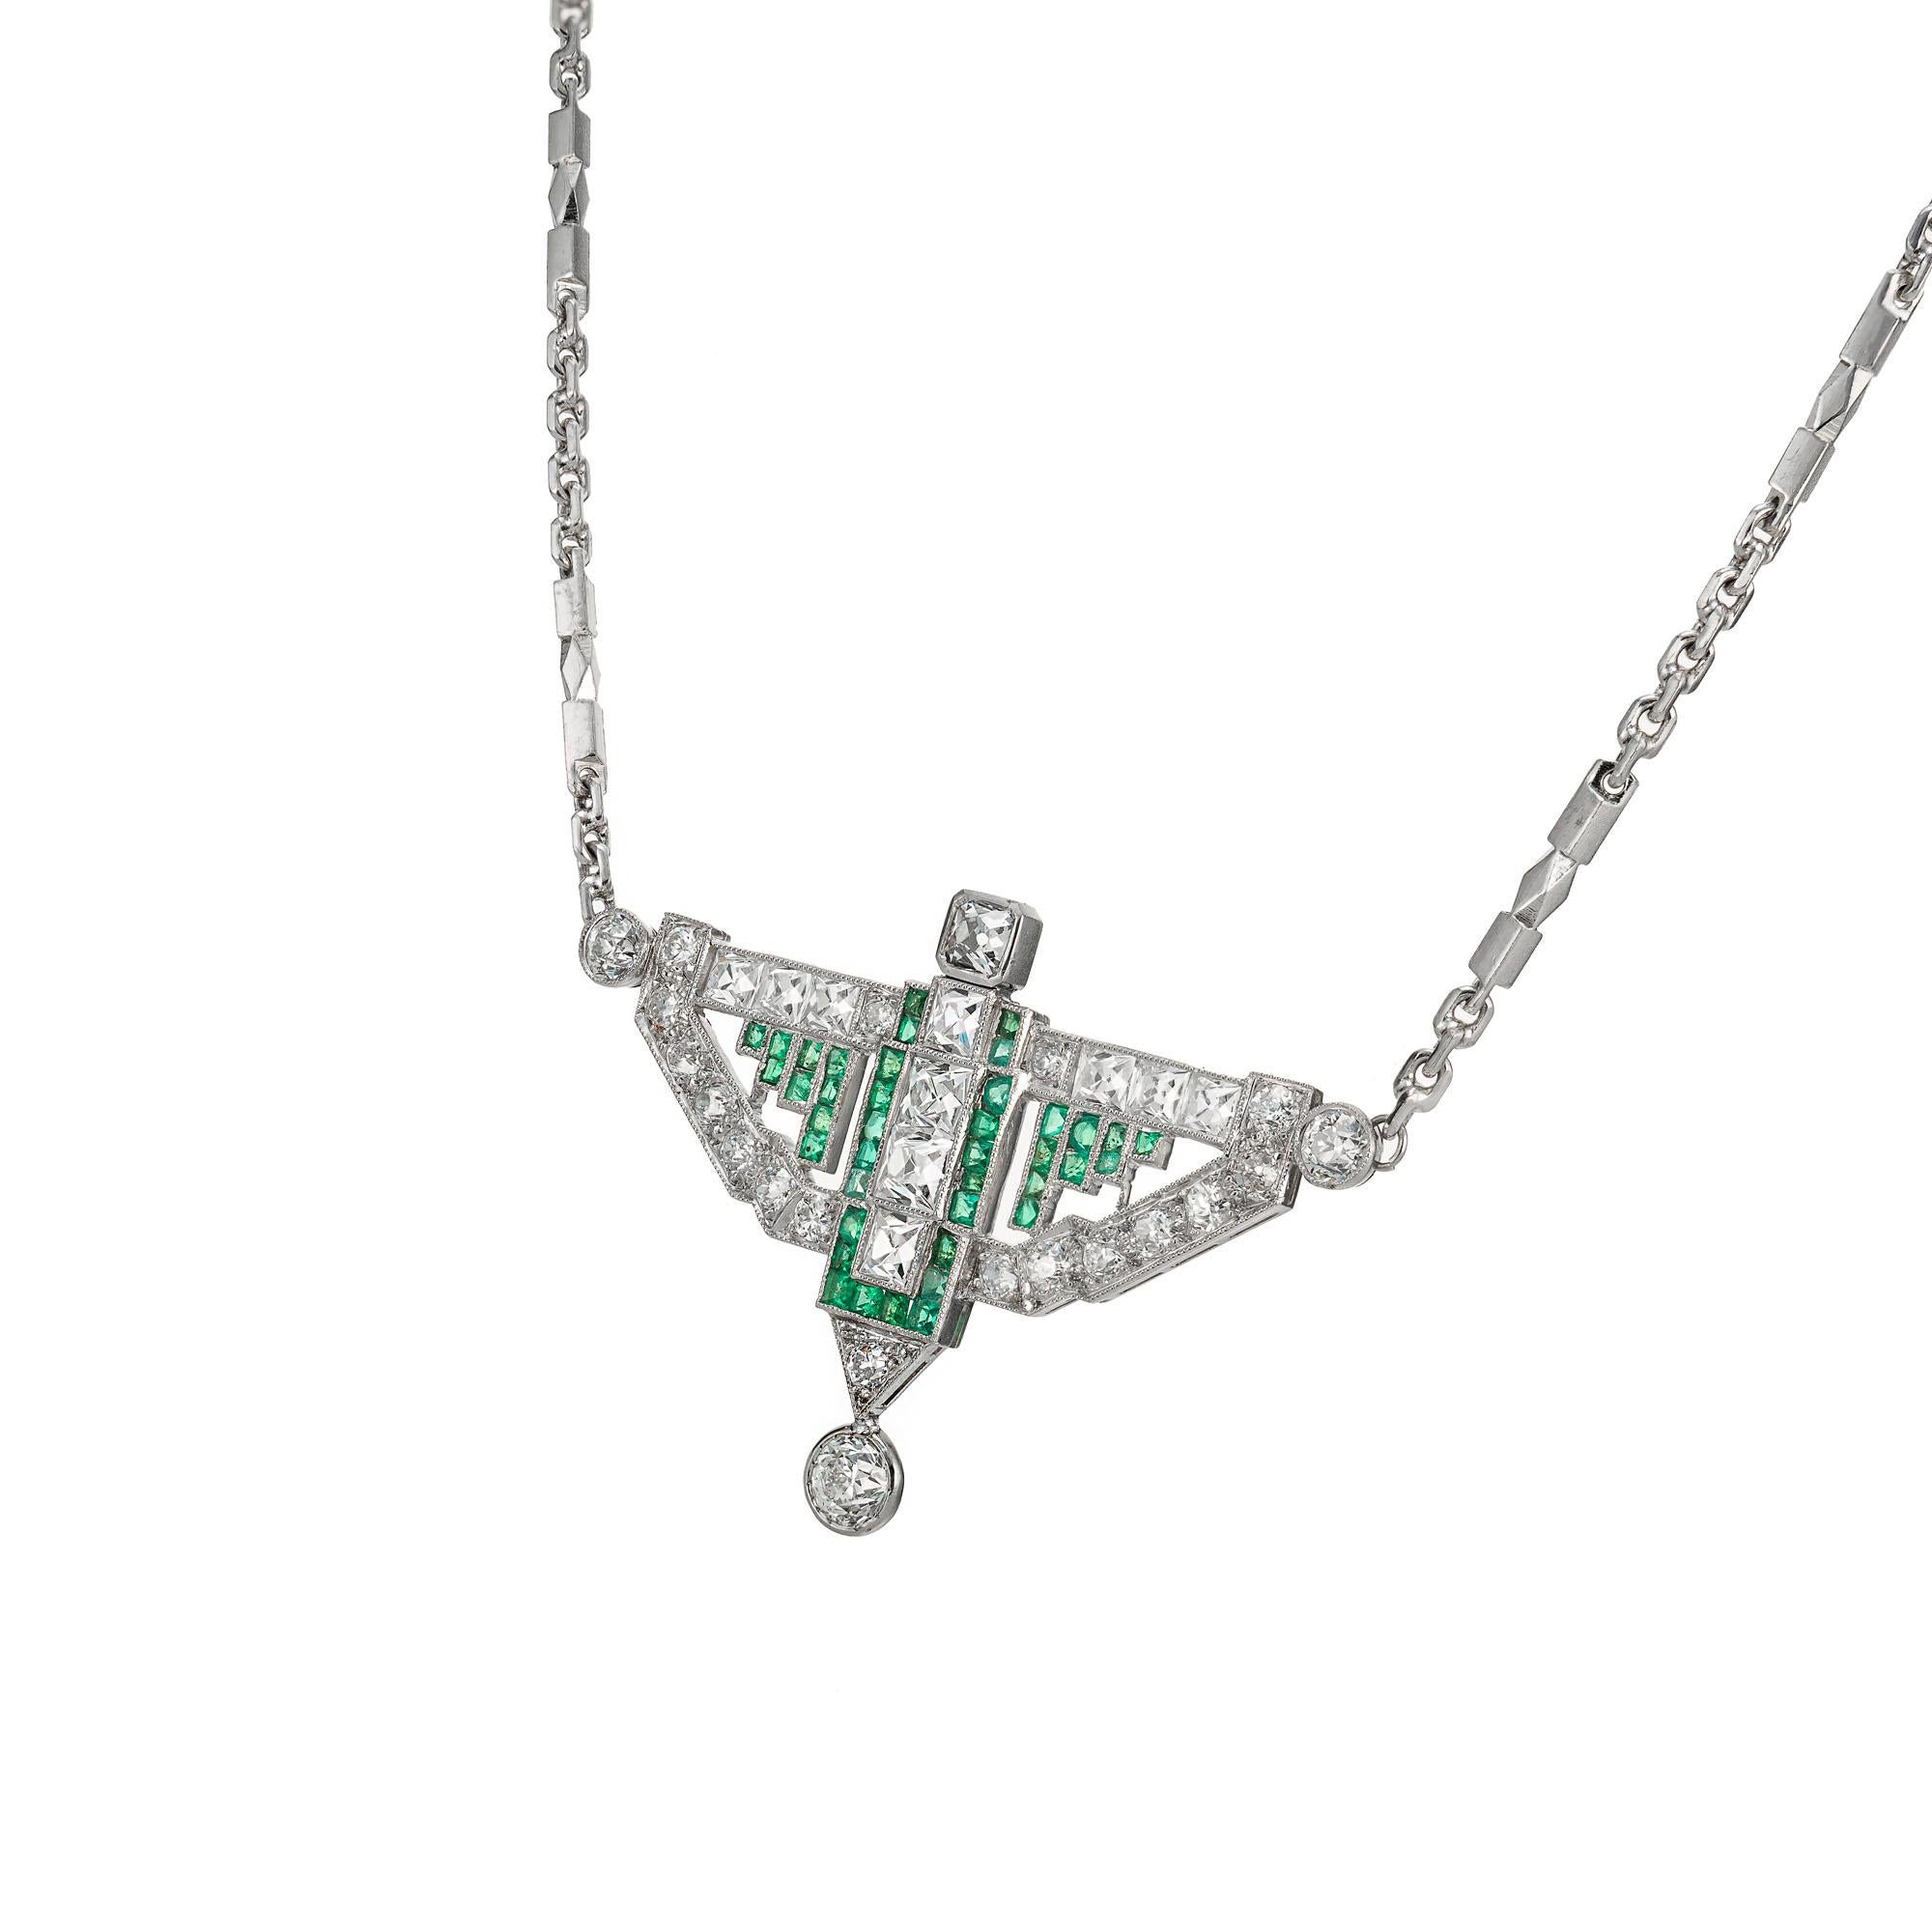 Art Deco 1915 handmade emerald and diamonds pendant necklace. Old Euro, Old Mine, Old square cut diamonds with square cut natural green emeralds set in a handmade platinum setting. 18 inches long with a later attached lobster claw. 

1 old European